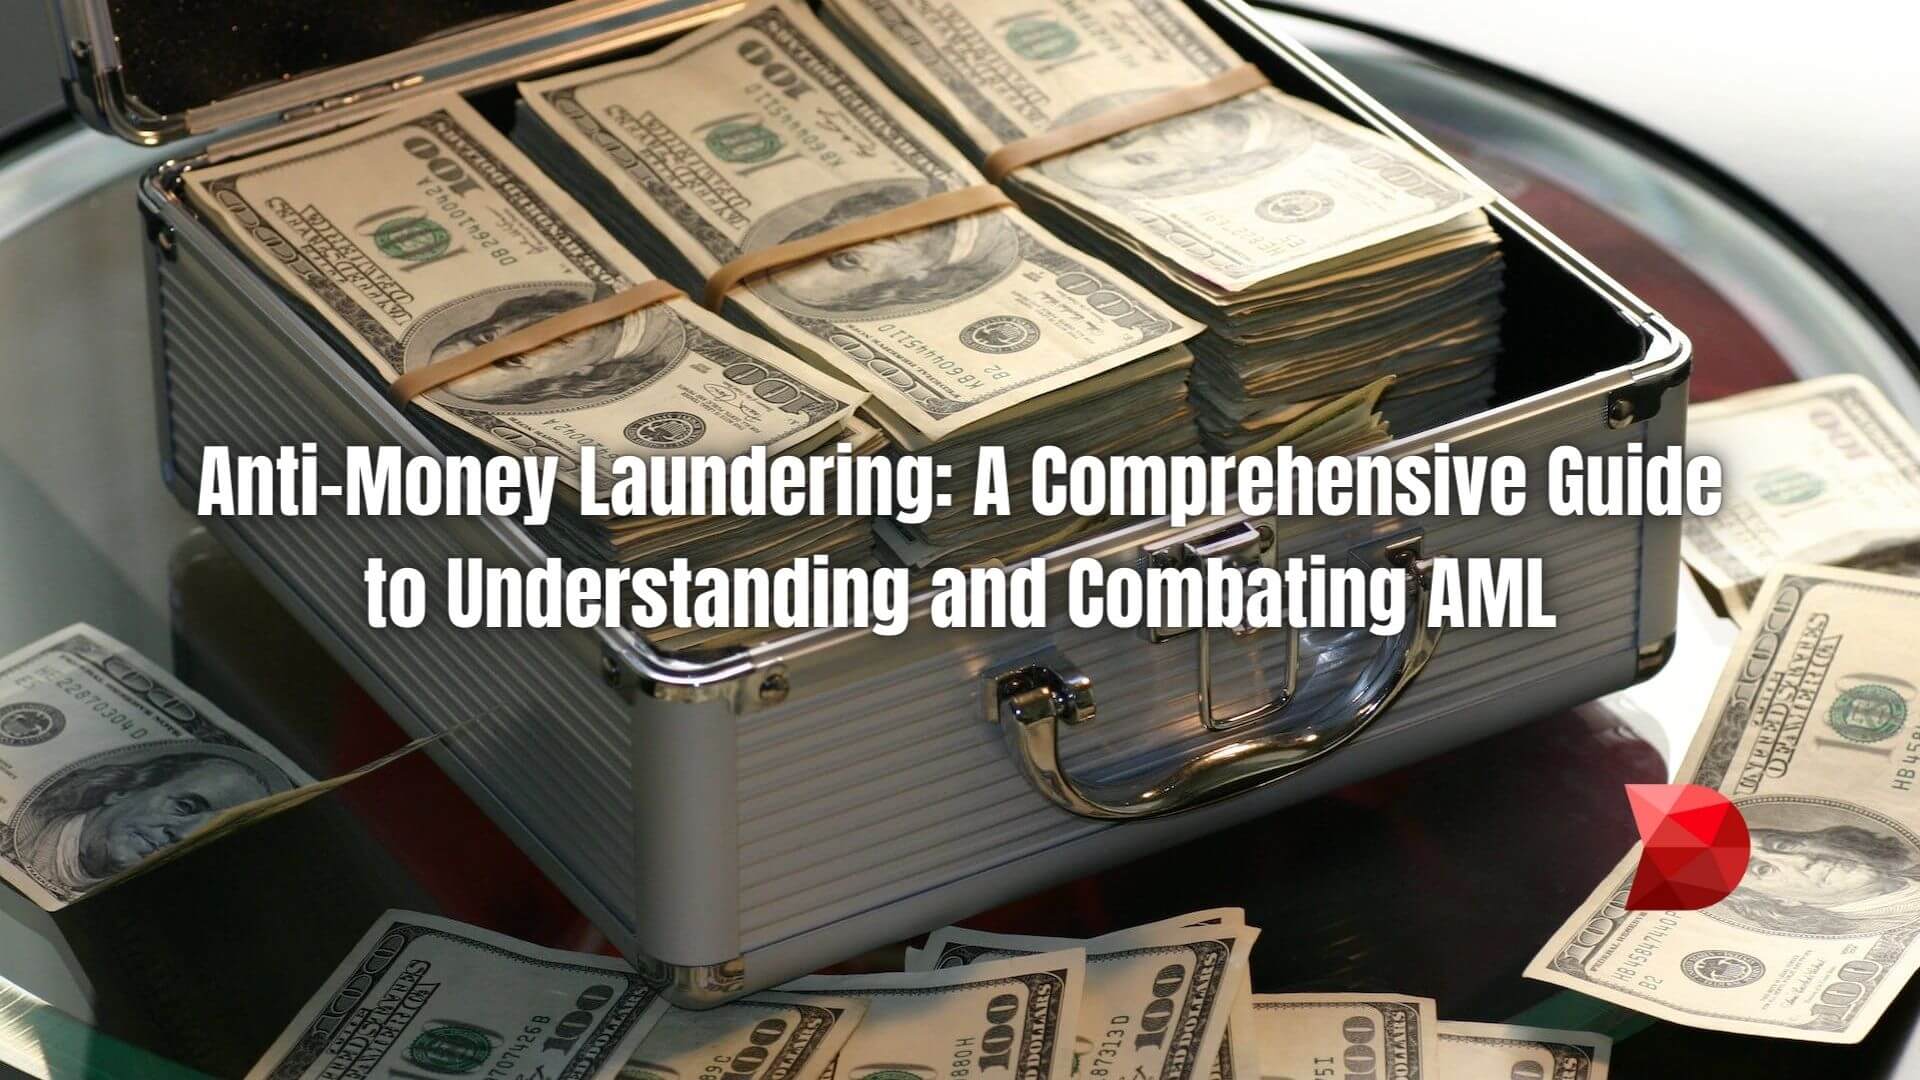 Master anti-money laundering with this comprehensive guide. Click here to learn strategies, laws, and tools. Protect your business today!